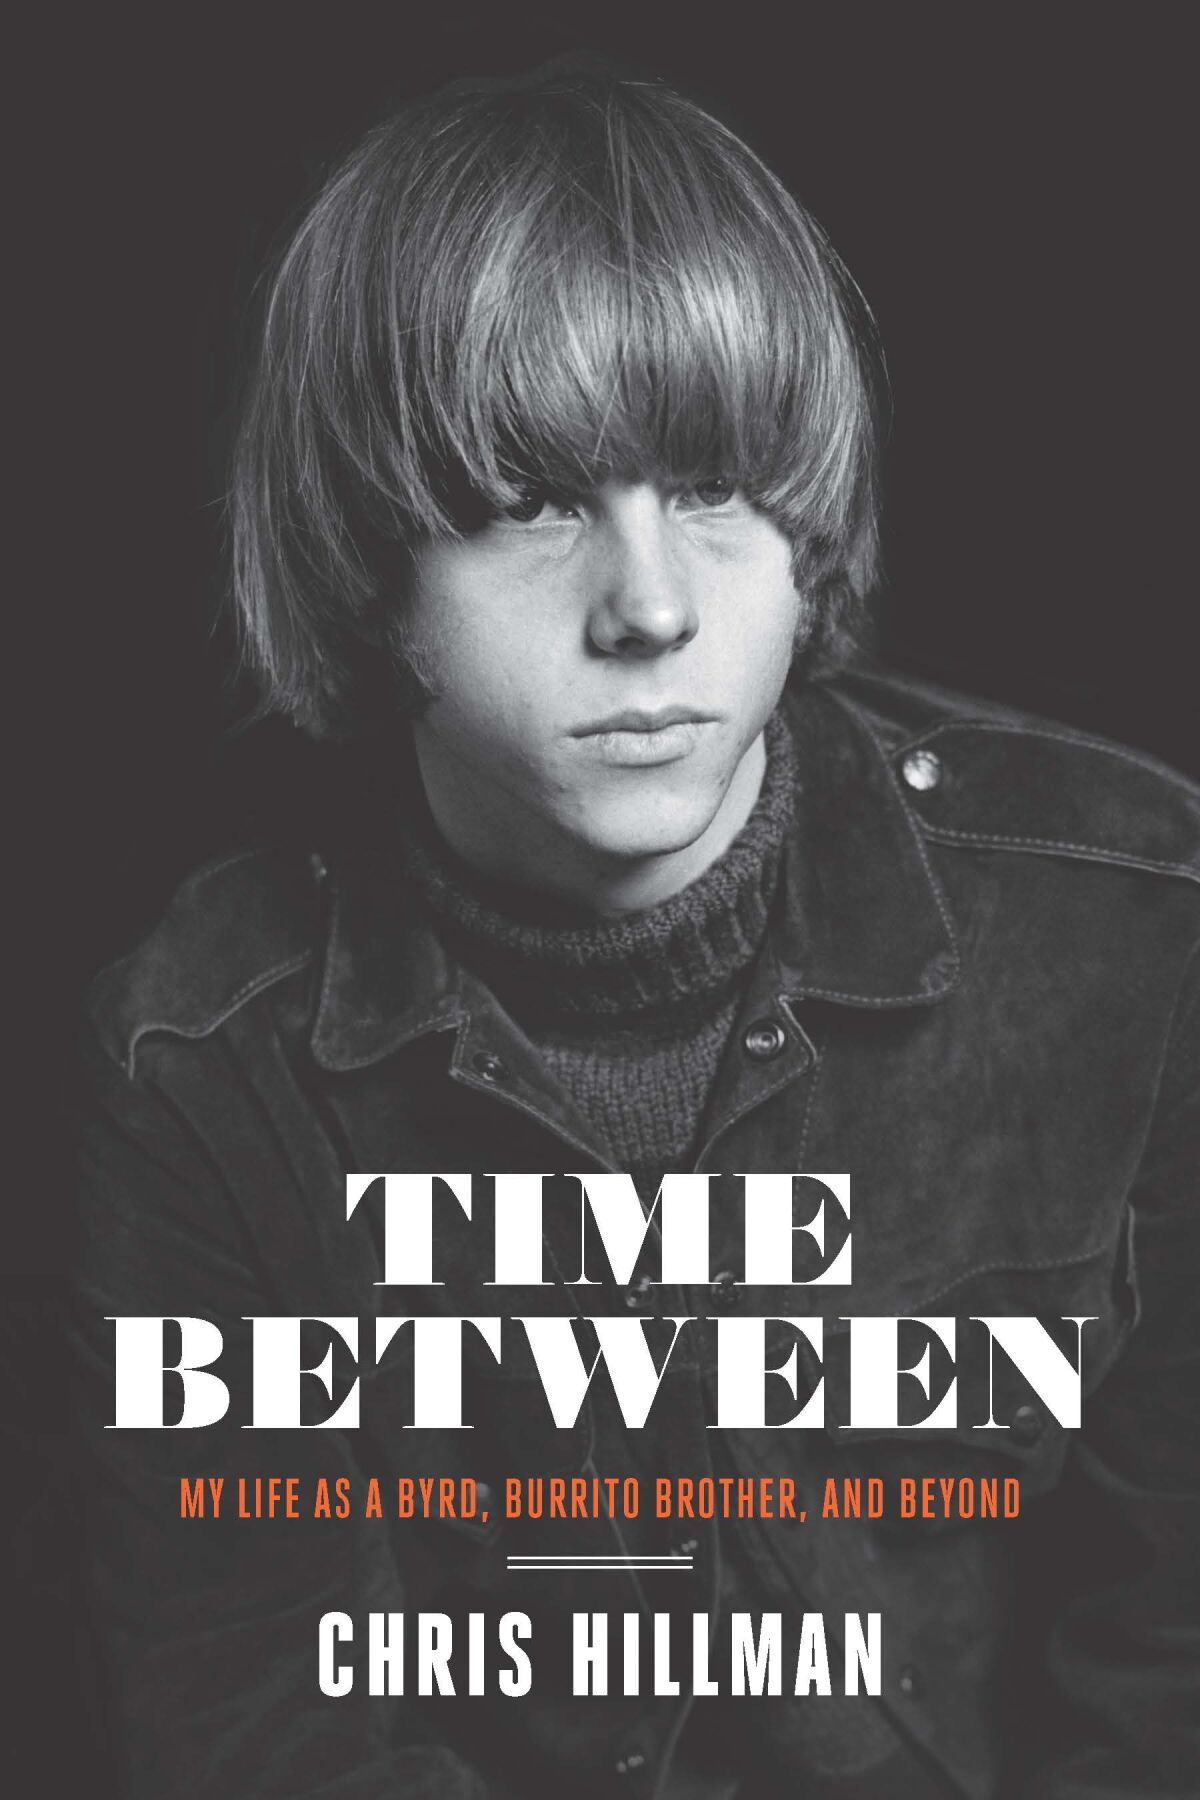 Chris Hillman on the cover of his 2020 memoir, "Time Between."